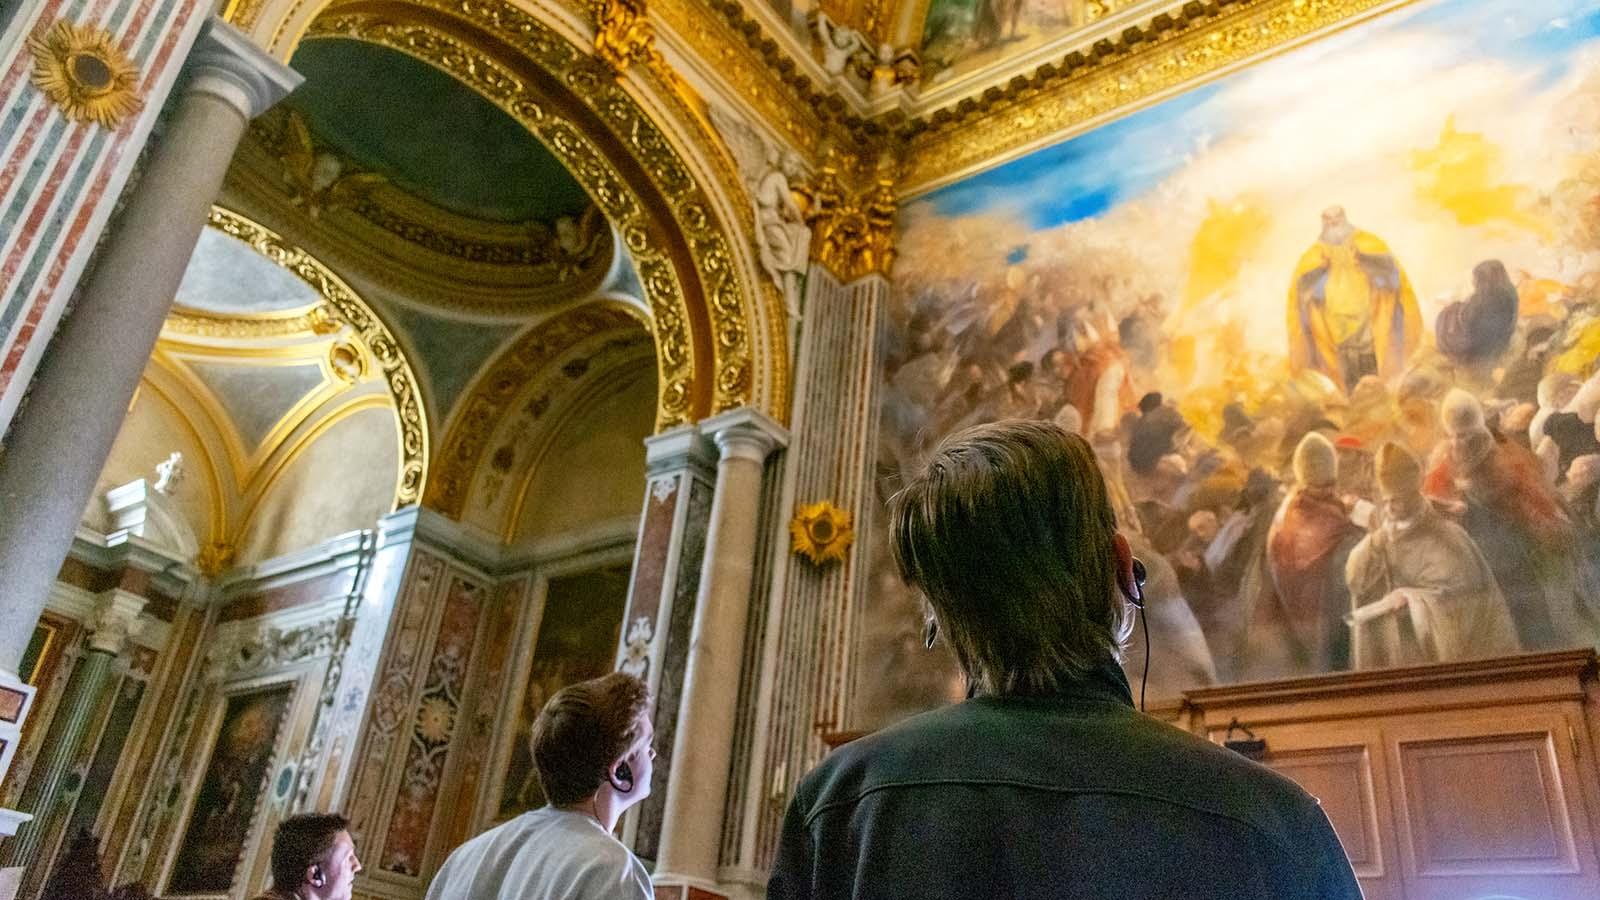 Three students studying abroad in Rome listening to commentary on headsets while admiring a classical painting in a museum